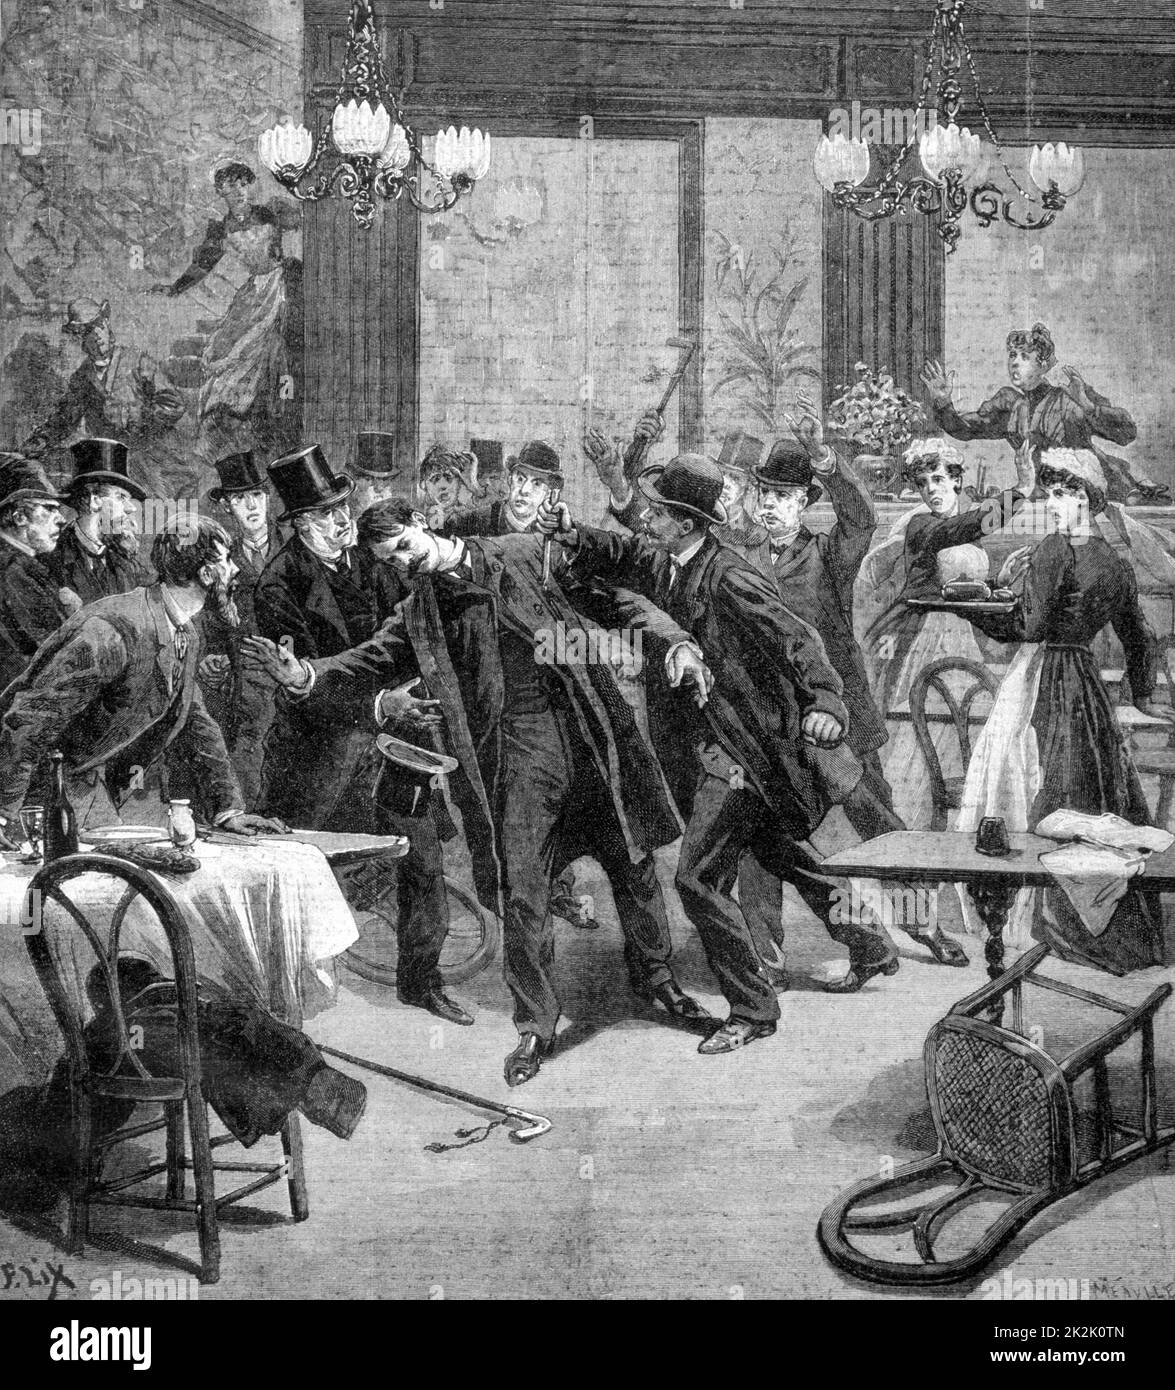 Knife attack on Georgevich, Serbian plenipotentiary in France in the Restaurant Duval, rue de l'Opera, Paris. From 'Le Petit Journal', Paris, 2 December 1893.  South-eastern Europe, Balkans Stock Photo